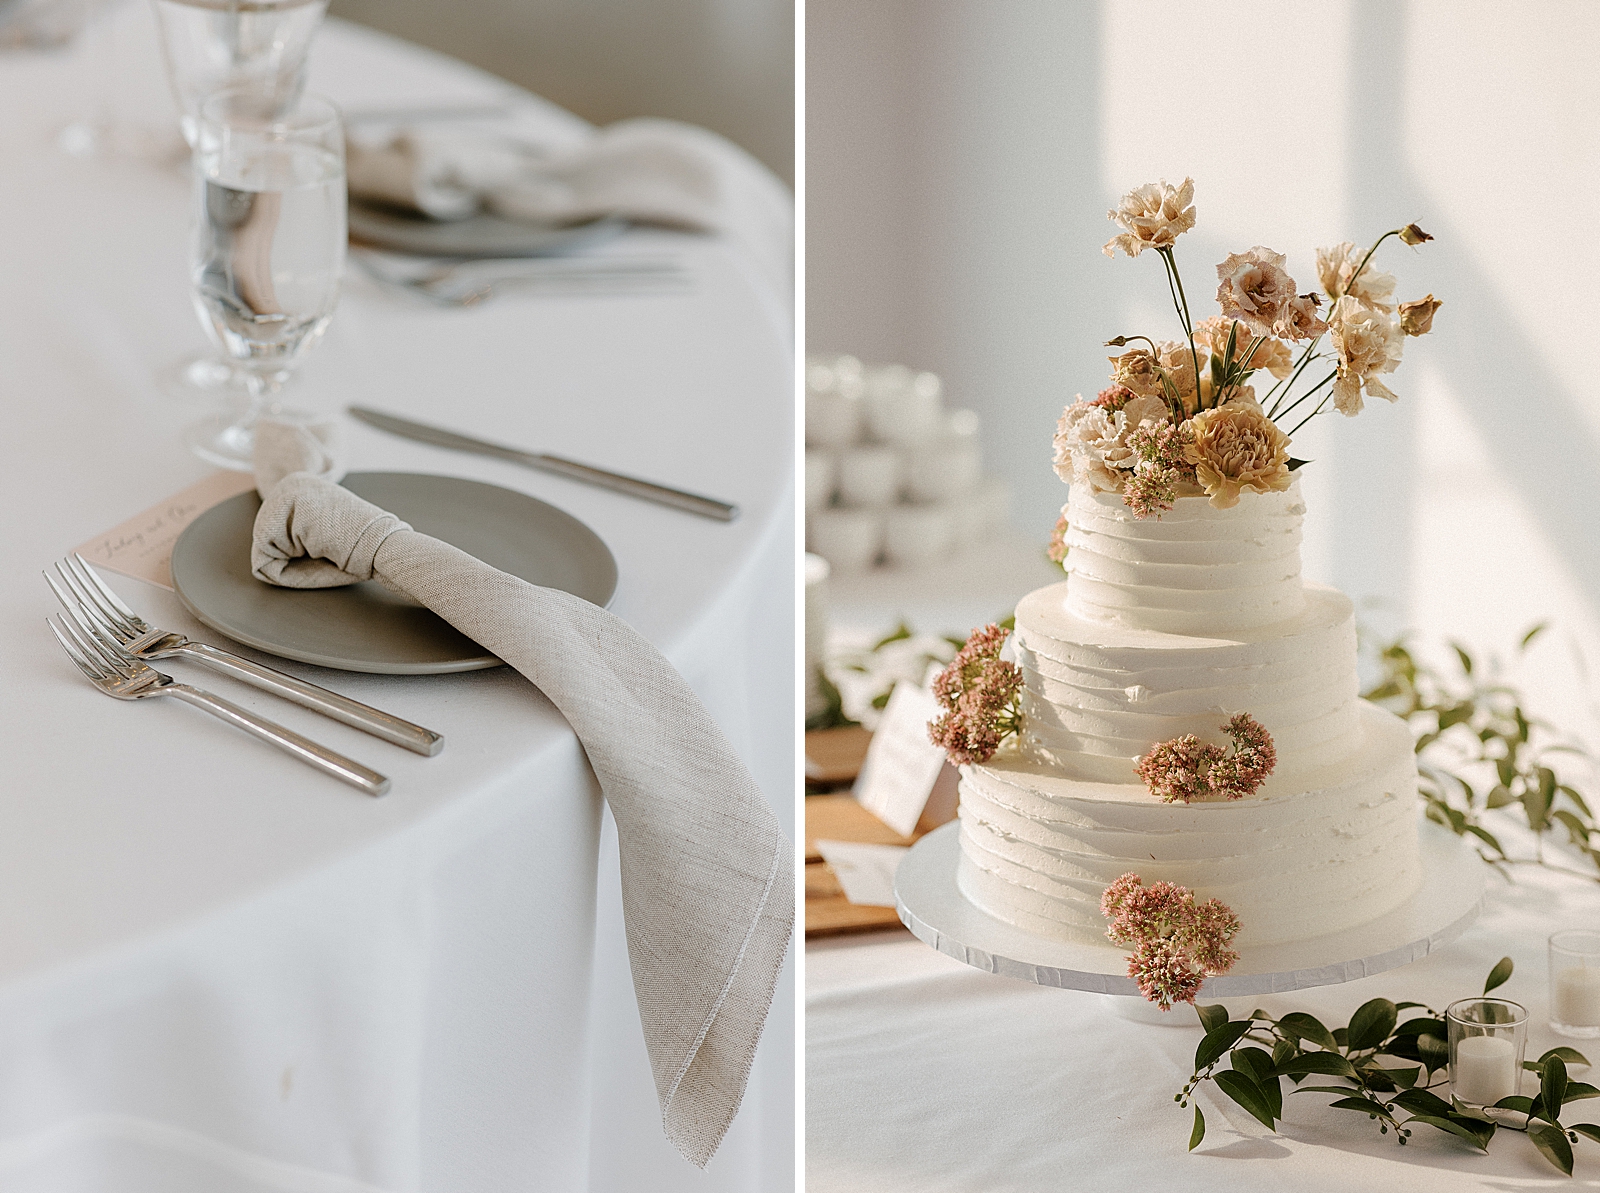 Detail shot of plate setting and wedding cake with floral decor 